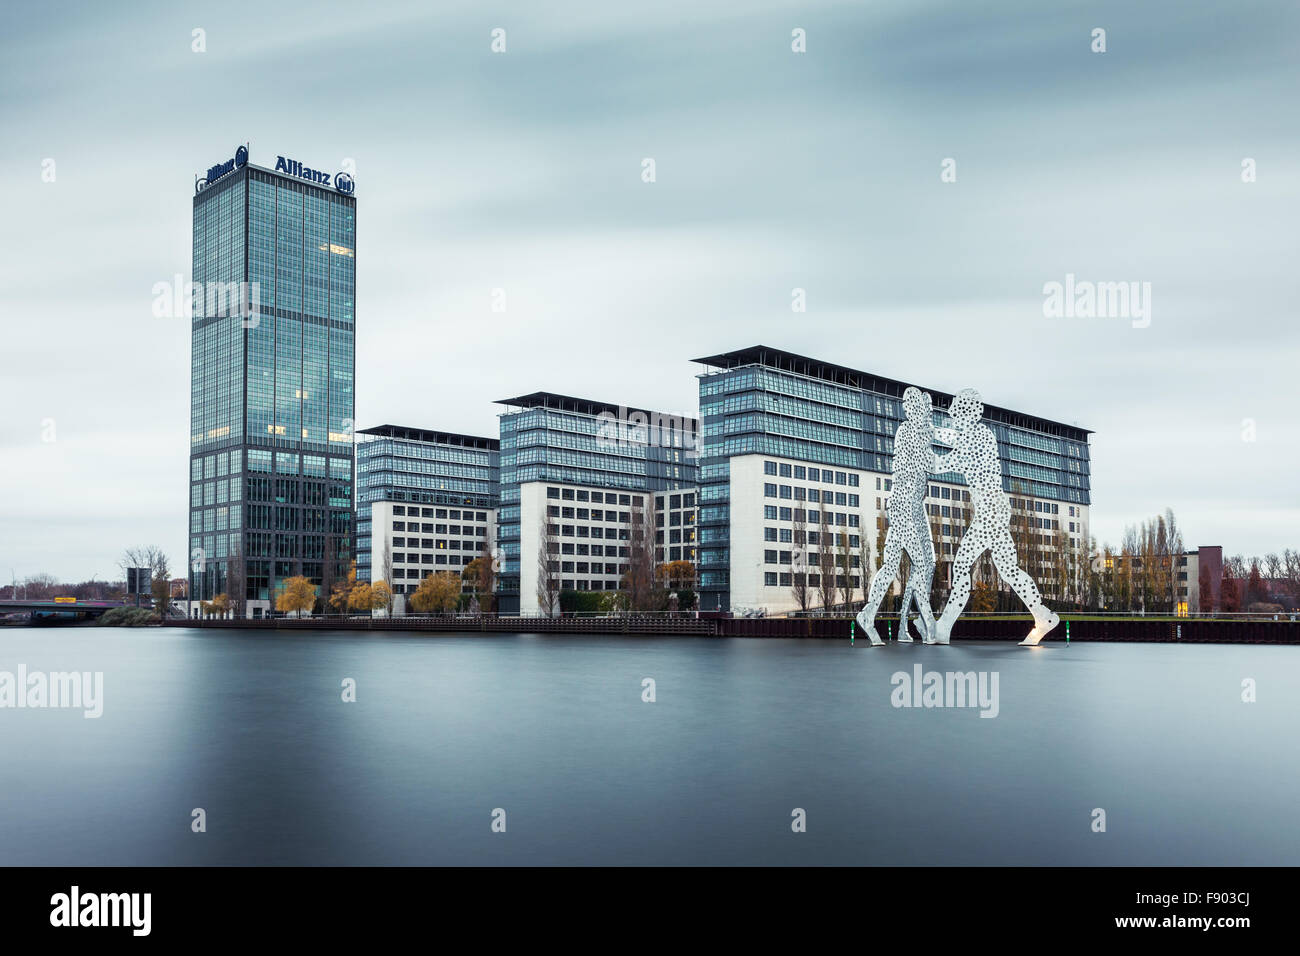 Treptowers with Allianz Tower by the River Spree, Molecule Man sculpture by the artist Jonathan Borofsky, Treptow, Berlin Stock Photo